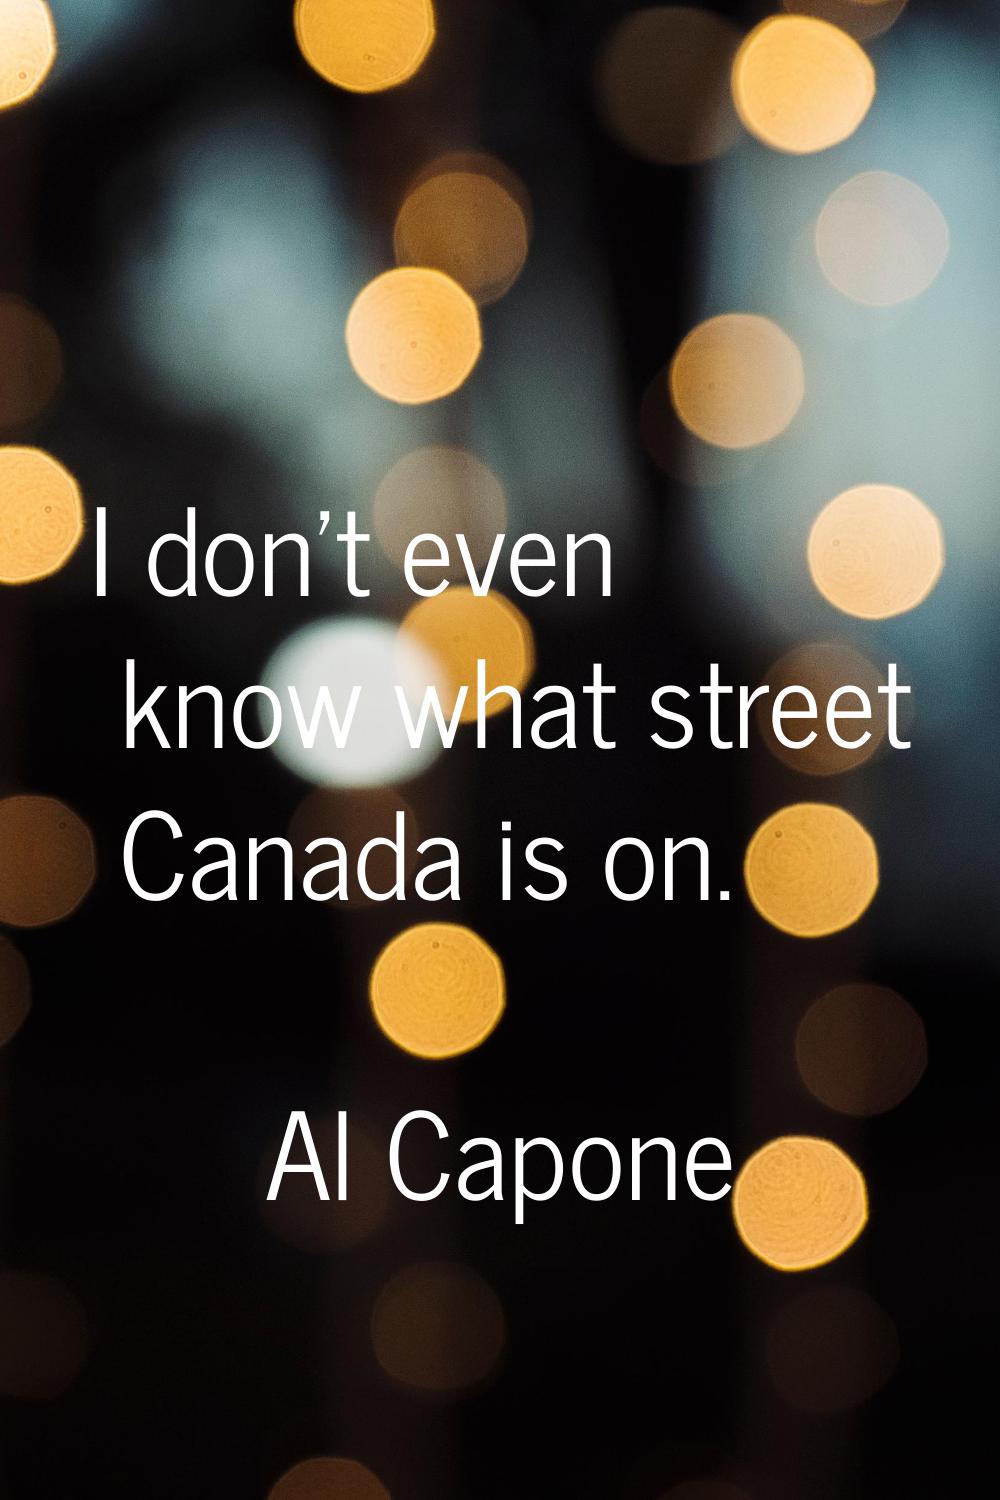 I don't even know what street Canada is on.